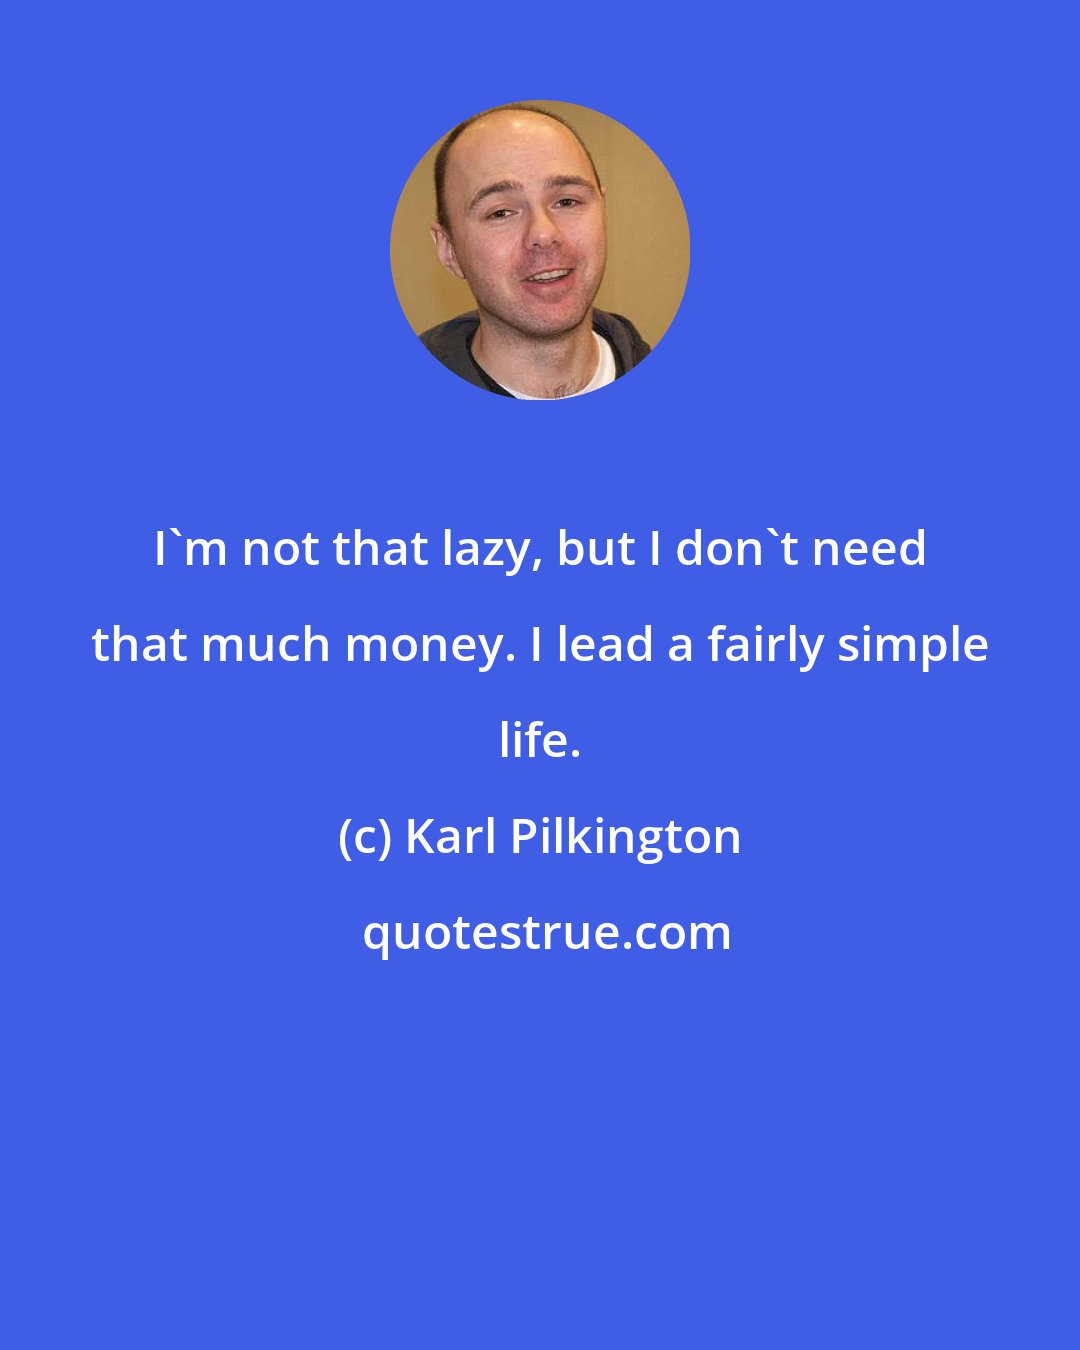 Karl Pilkington: I'm not that lazy, but I don't need that much money. I lead a fairly simple life.